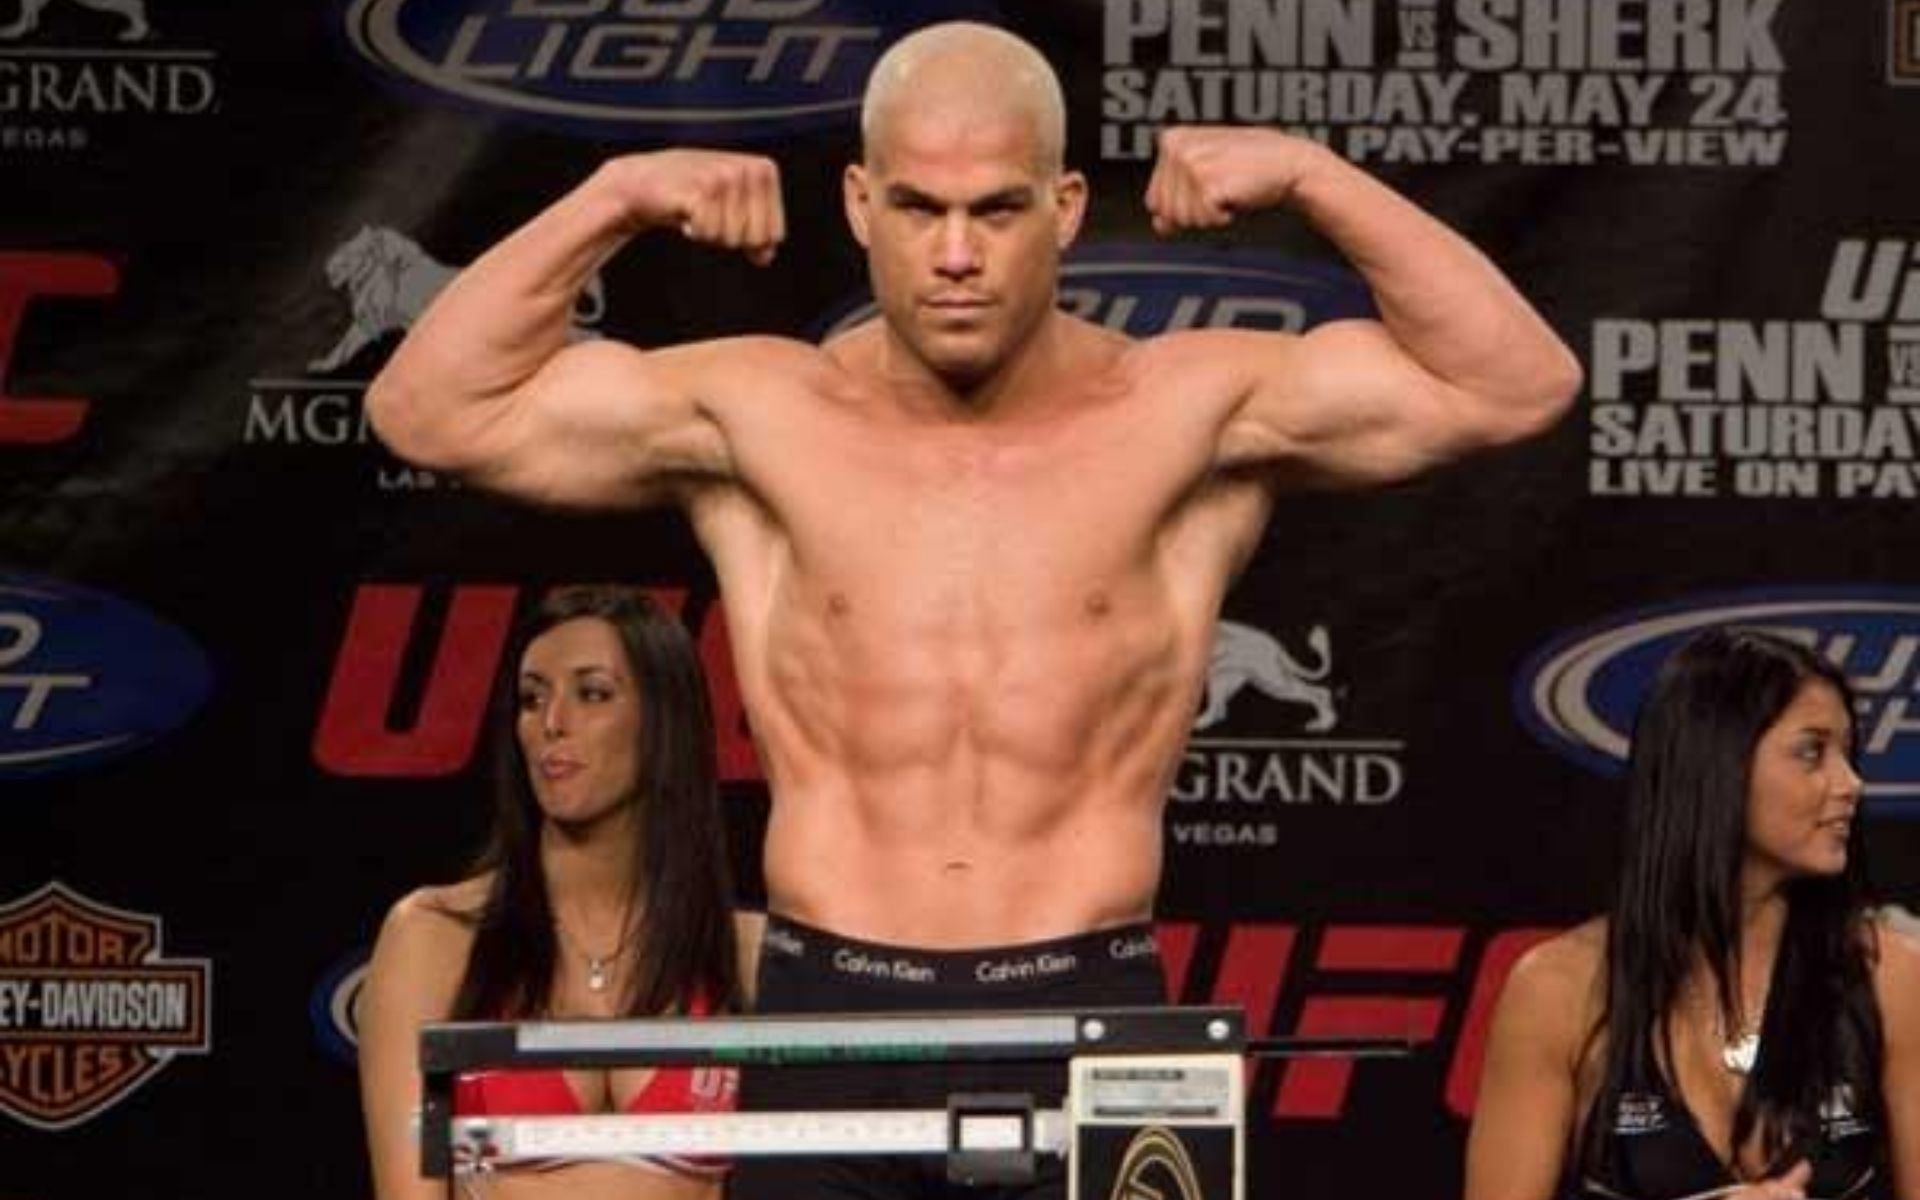 Former light-heavyweight king Tito Ortiz would probably struggle in the octagon today